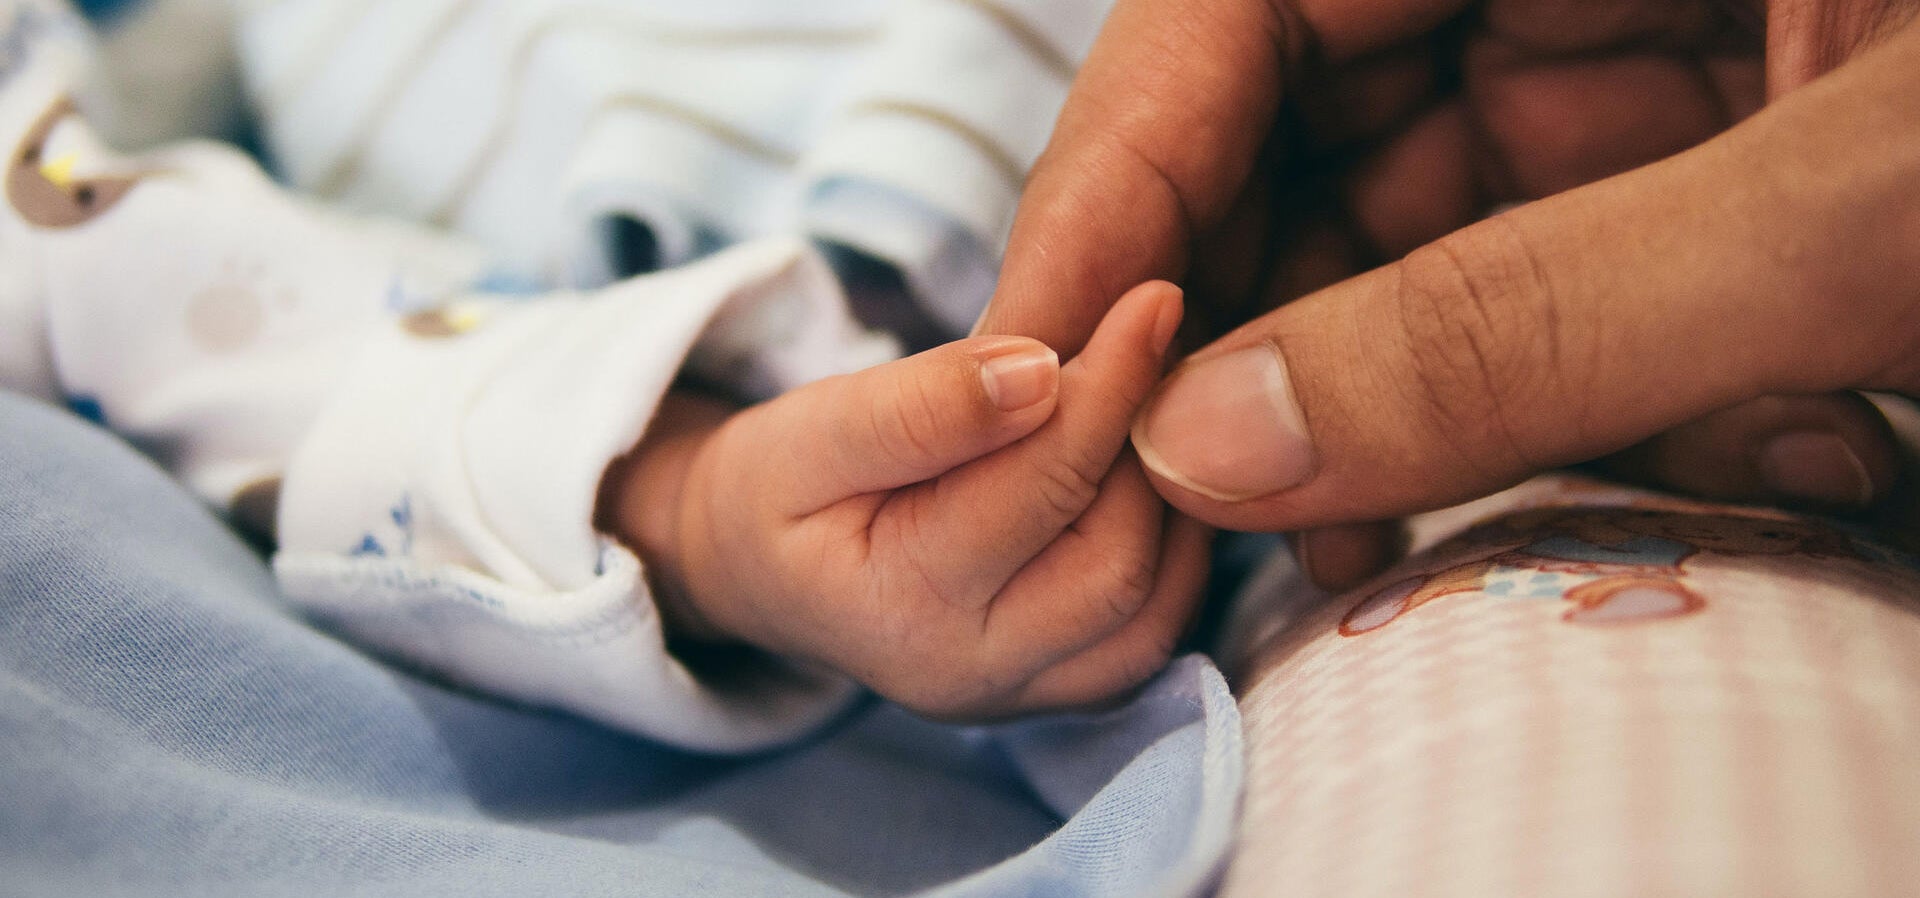 Stock image of adult hand holding infant's hand.